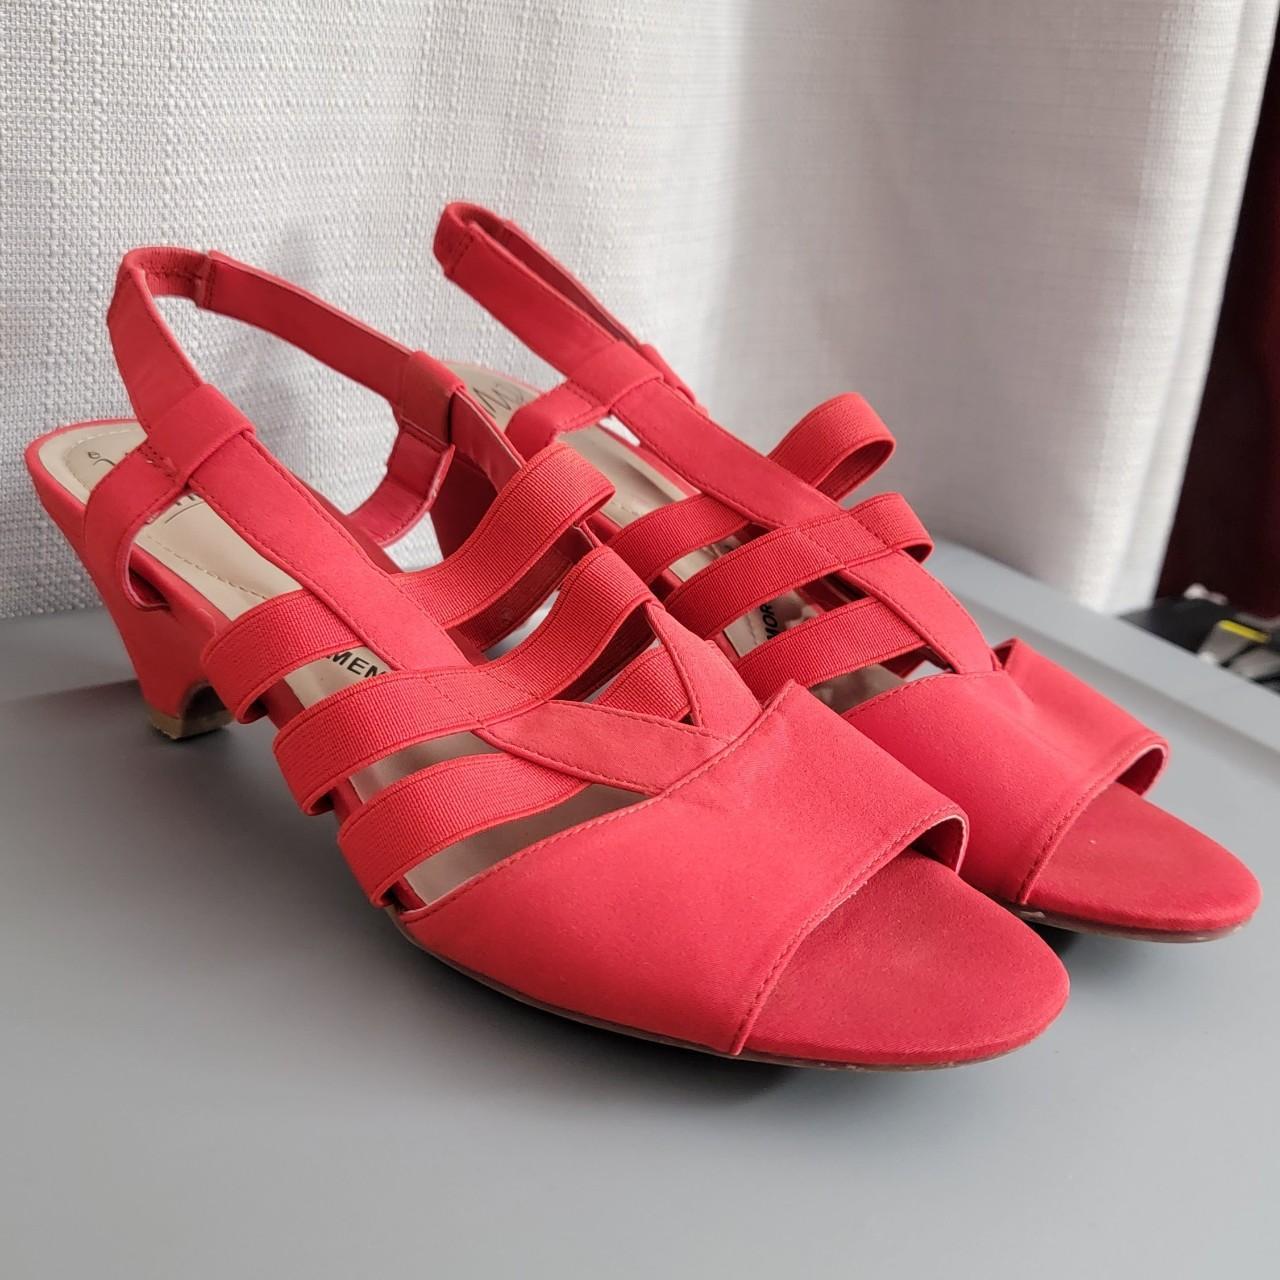 Impo Women's Red Sandals (2)